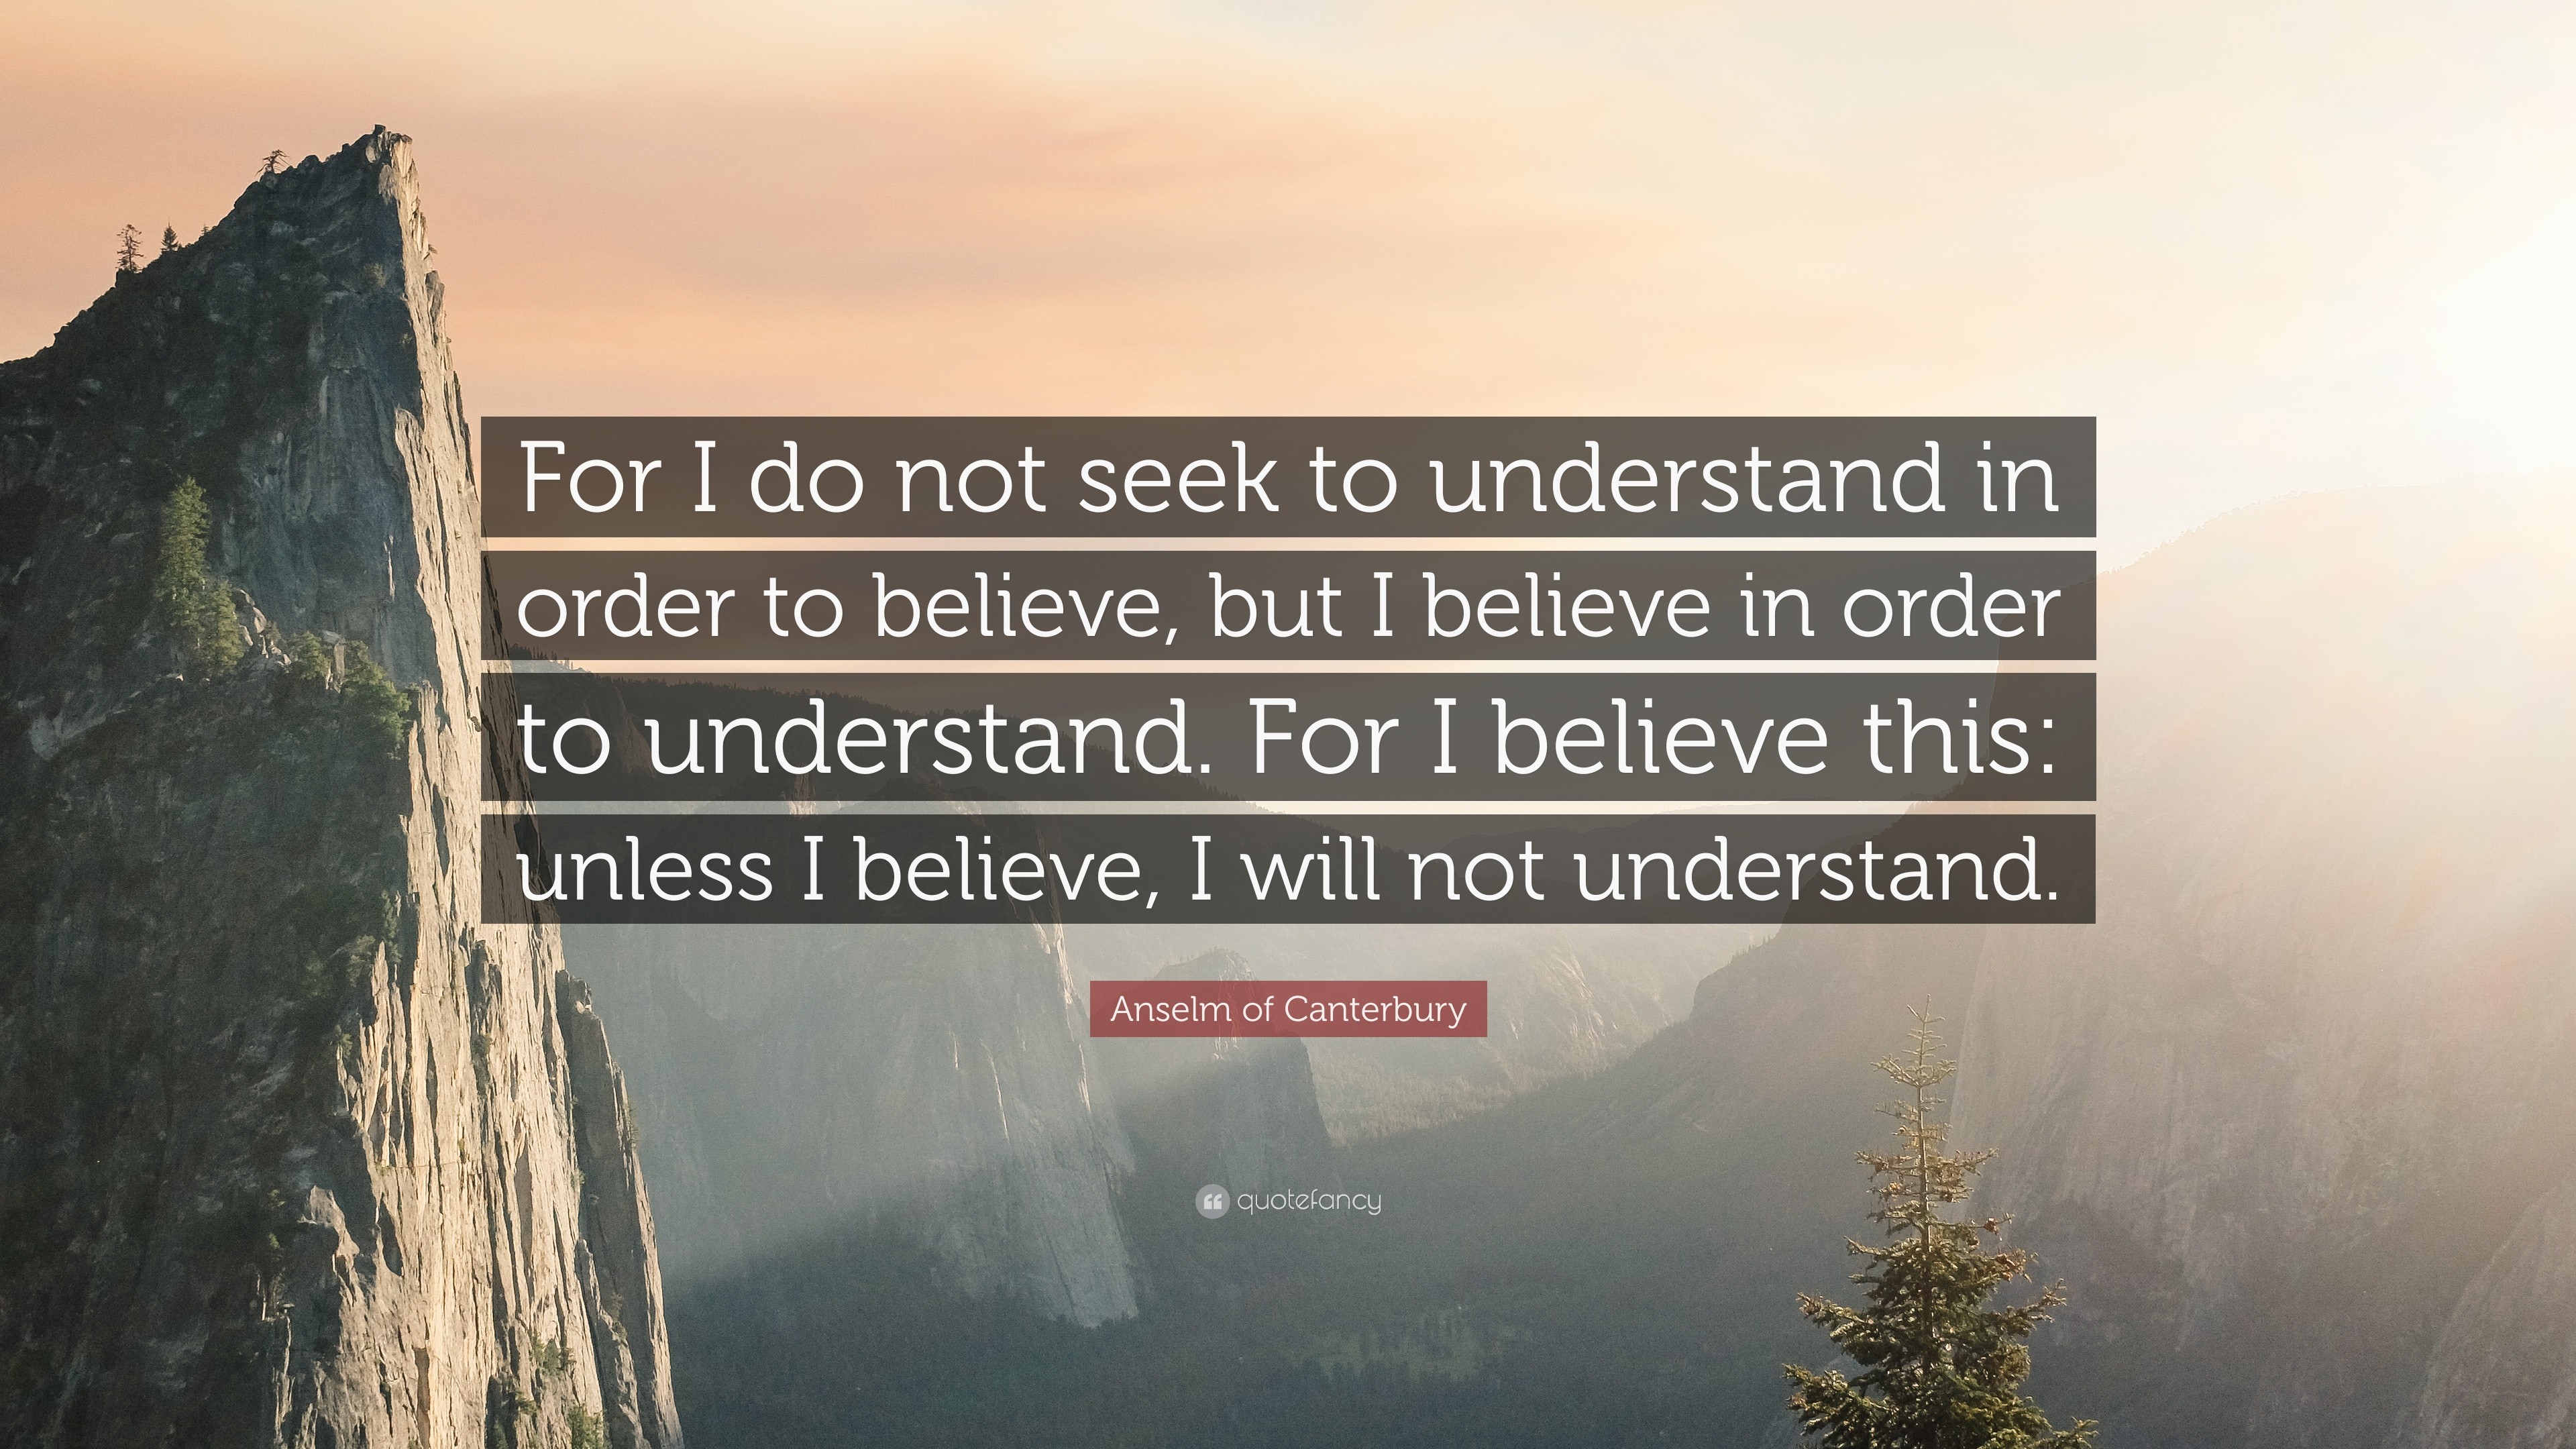 Anselm of Canterbury Quote For I do not seek to understand in order to